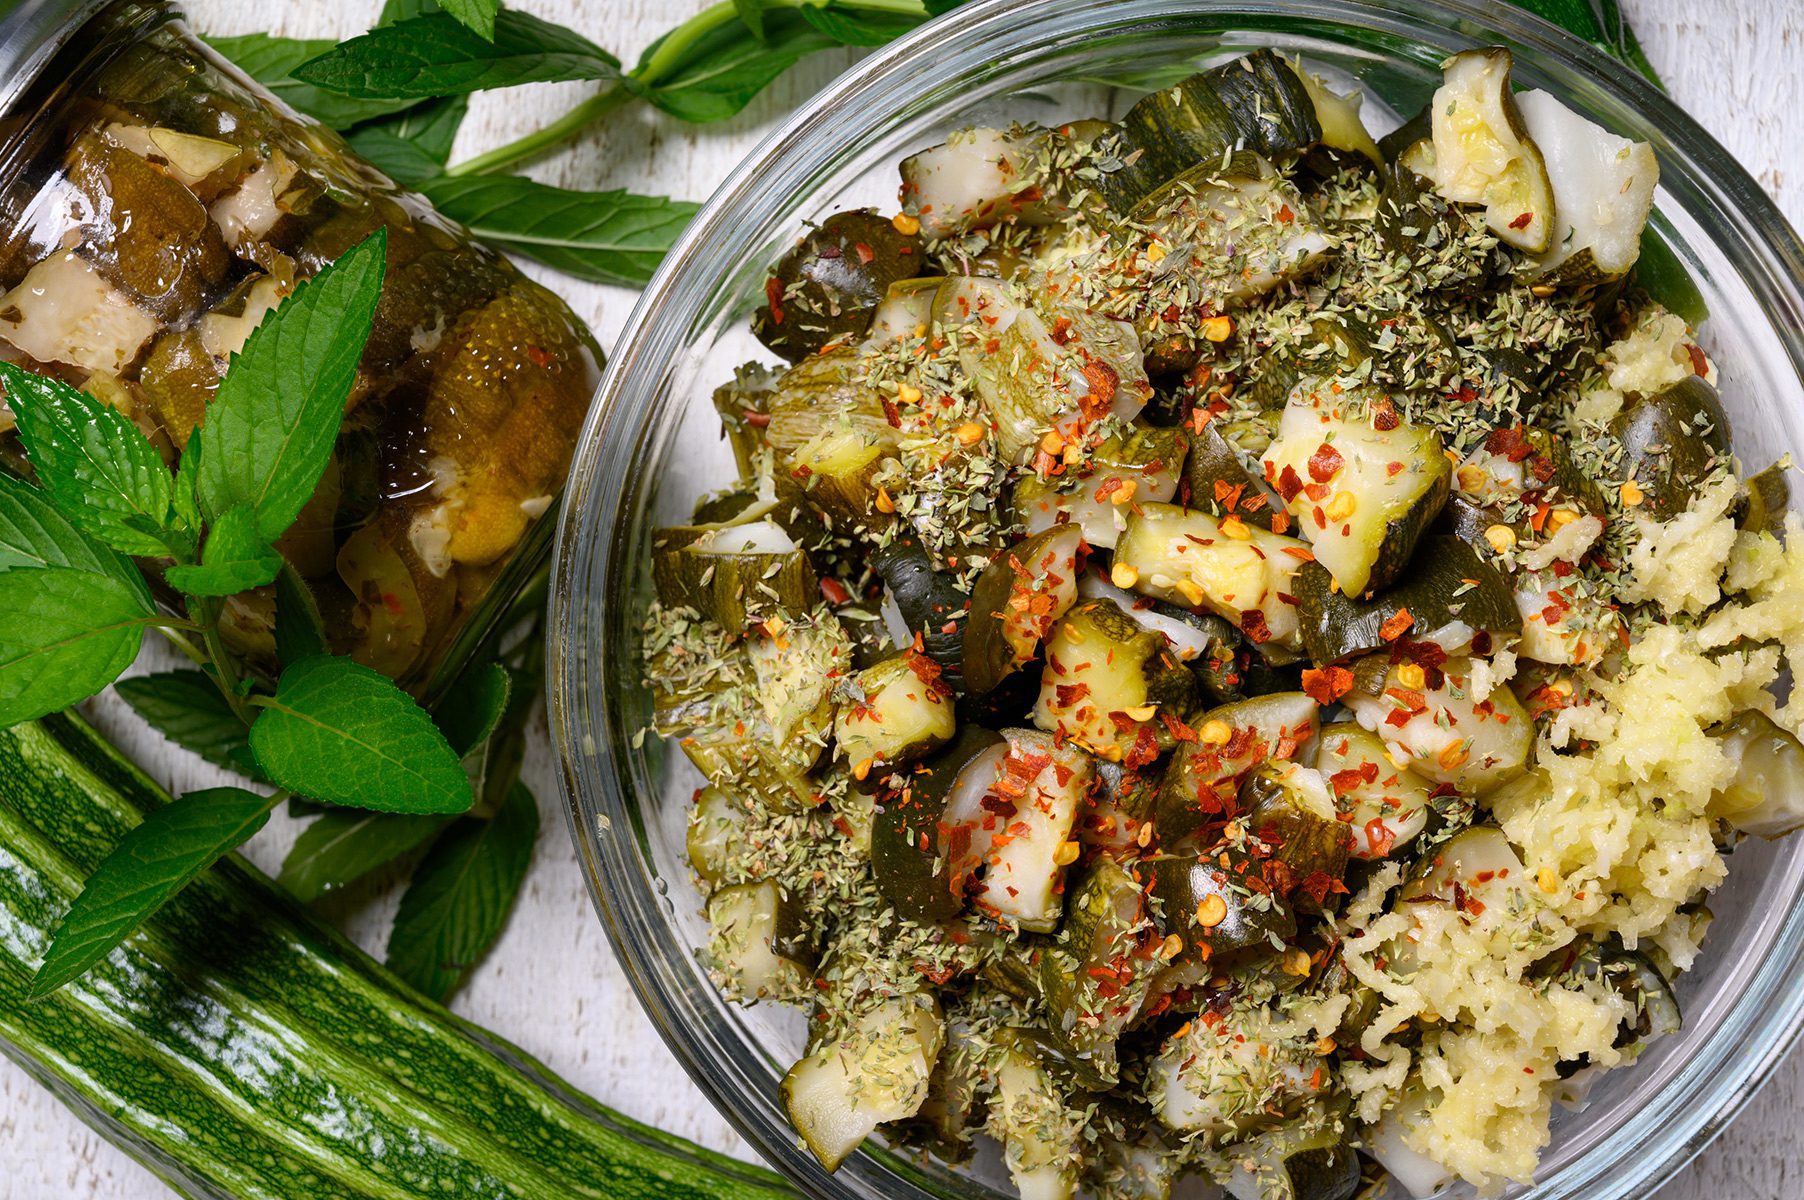 zucchini squeezed of vinegar and dressed with oregano, mint, hot pepper, and garlic